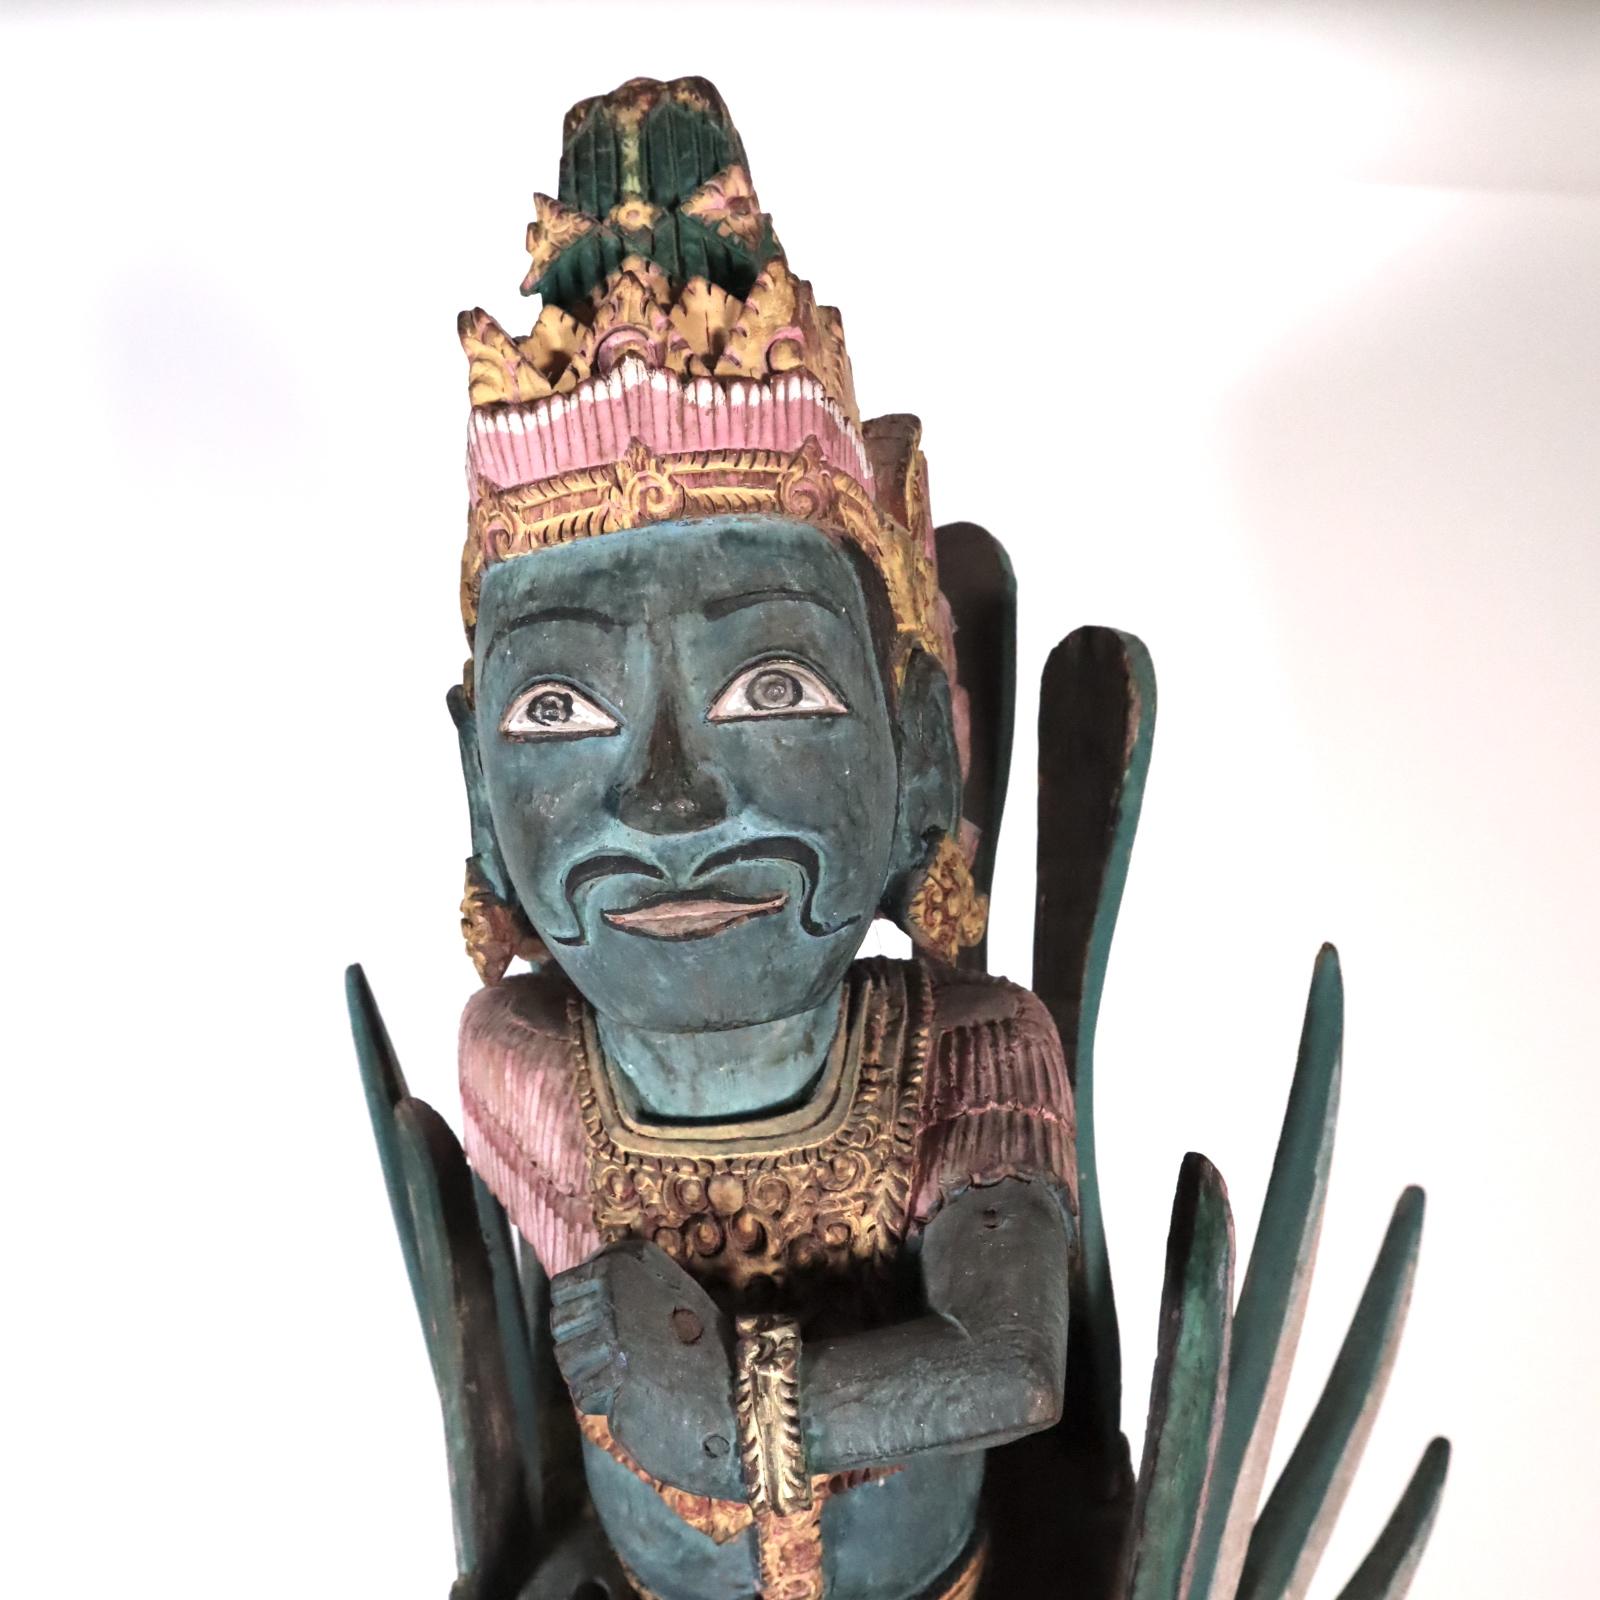 Vishnu riding Garuda, painted wood, from Bali, Indonesia, late 20th century. Carved form one piece of hardwood with the wing and tail feathers attached with nails.
As traditional, Vishnu is a blue color. He leans forward with an intense but benign